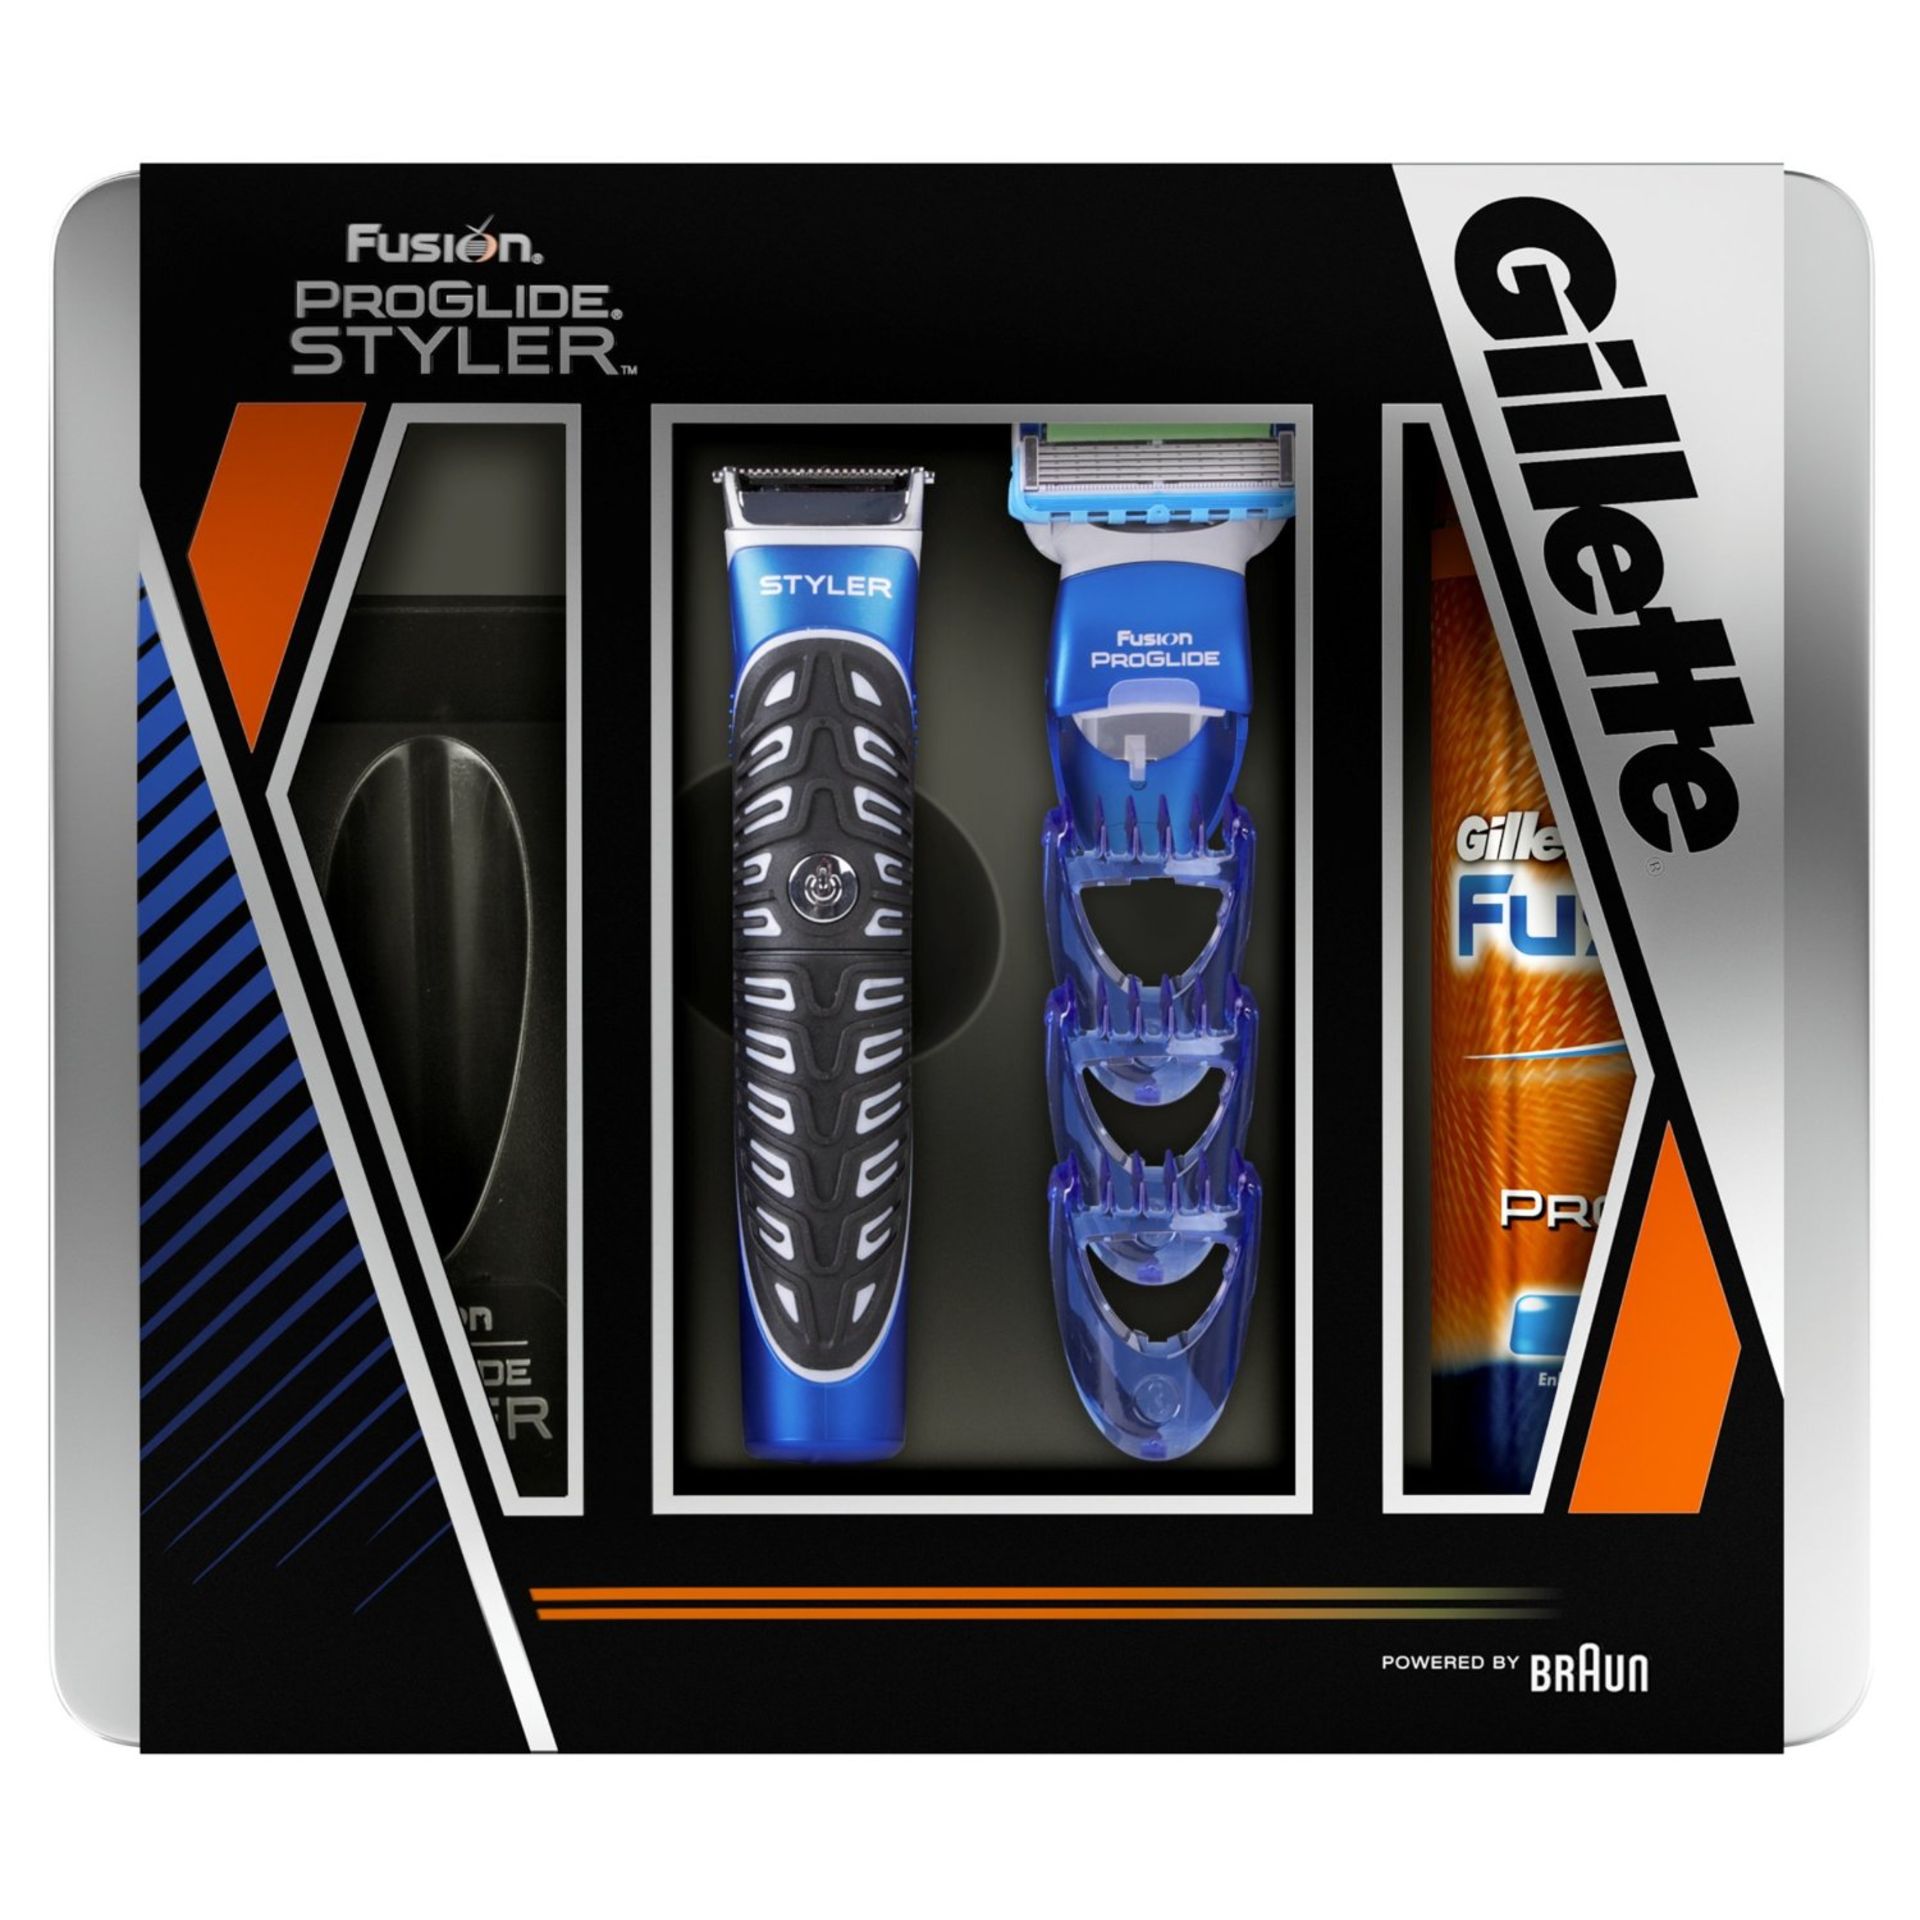 V *TRADE QTY* Brand New Gillette Styler Plus Razor Plus Hydrating Set (Item available after 14/9/